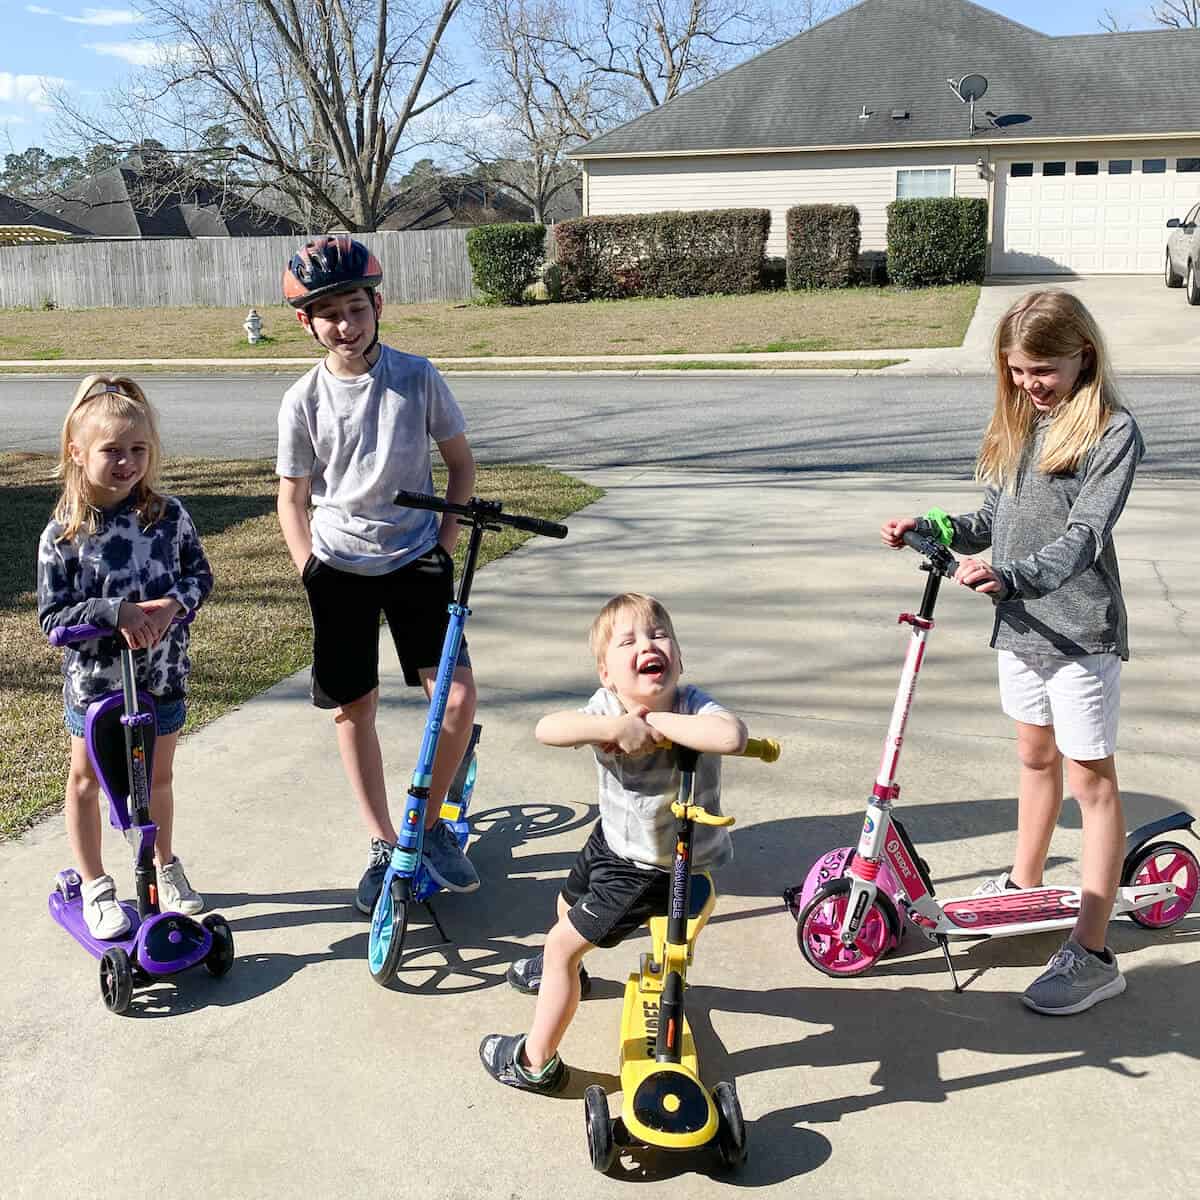 The Scooter for 2-Year-Olds - The Journey of